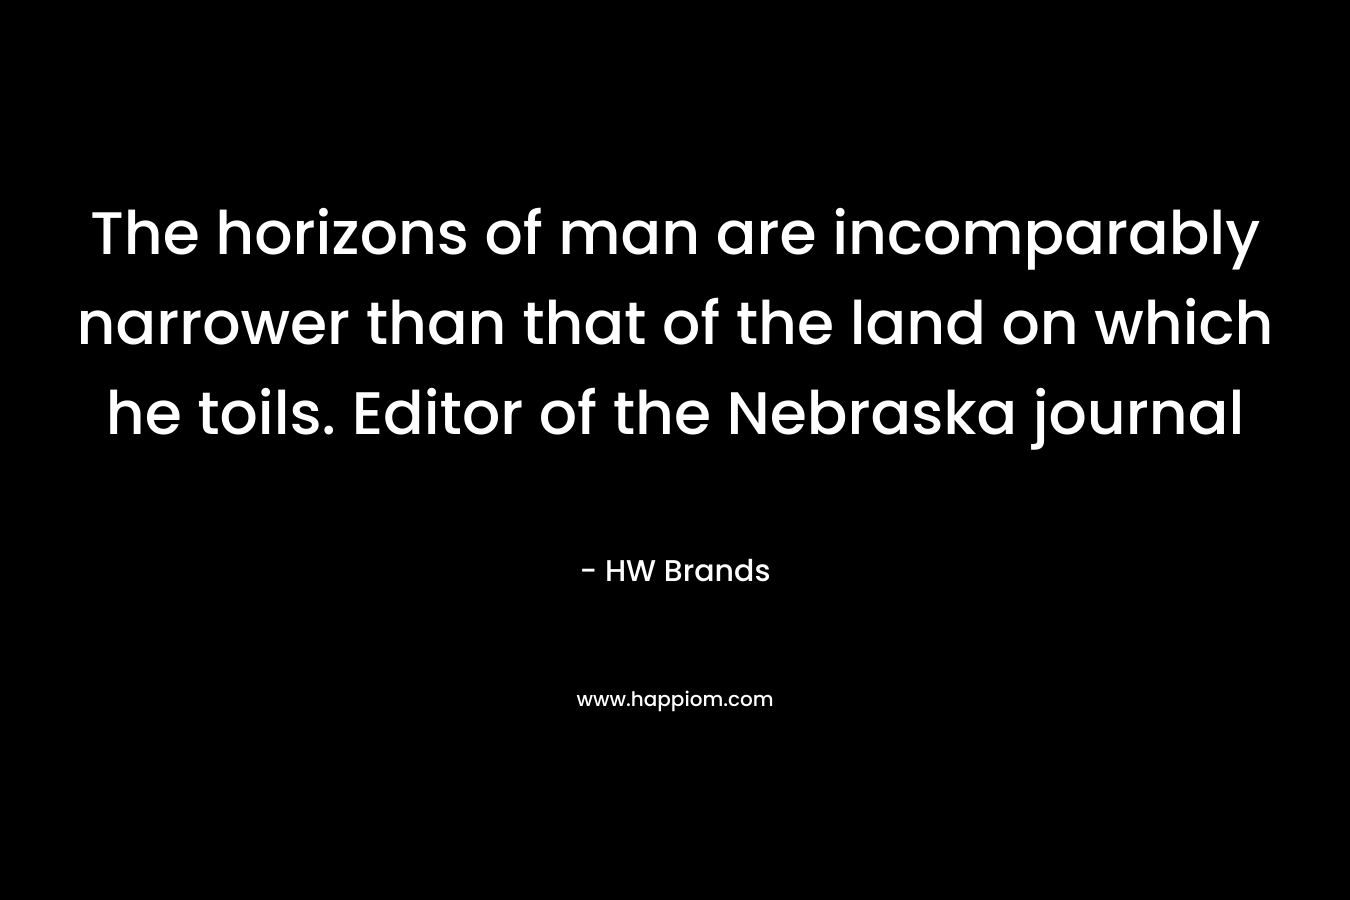 The horizons of man are incomparably narrower than that of the land on which he toils. Editor of the Nebraska journal